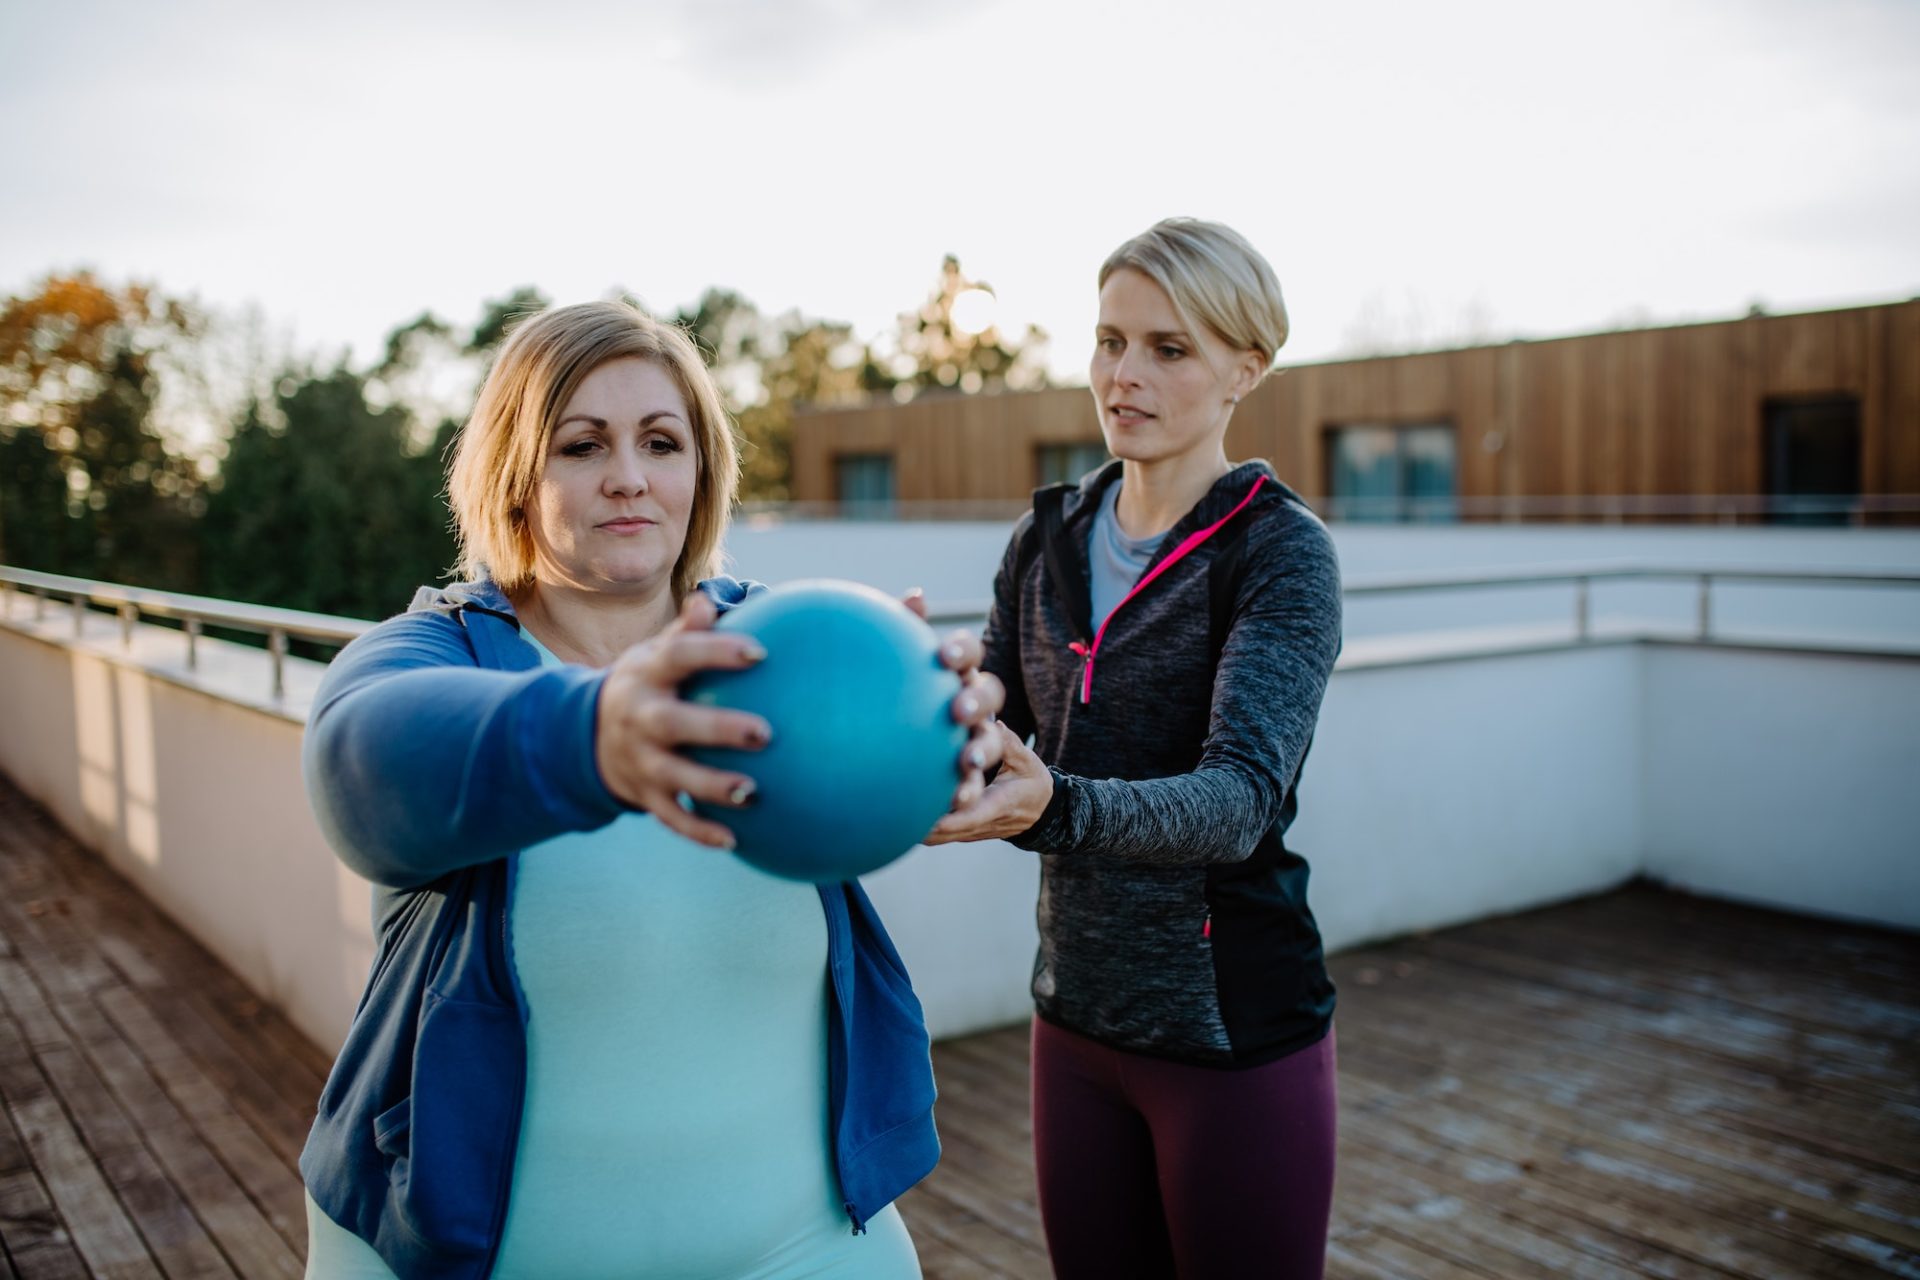 Overweight woman holding ball and exercising with personal trainer in outdoors on gym terrace